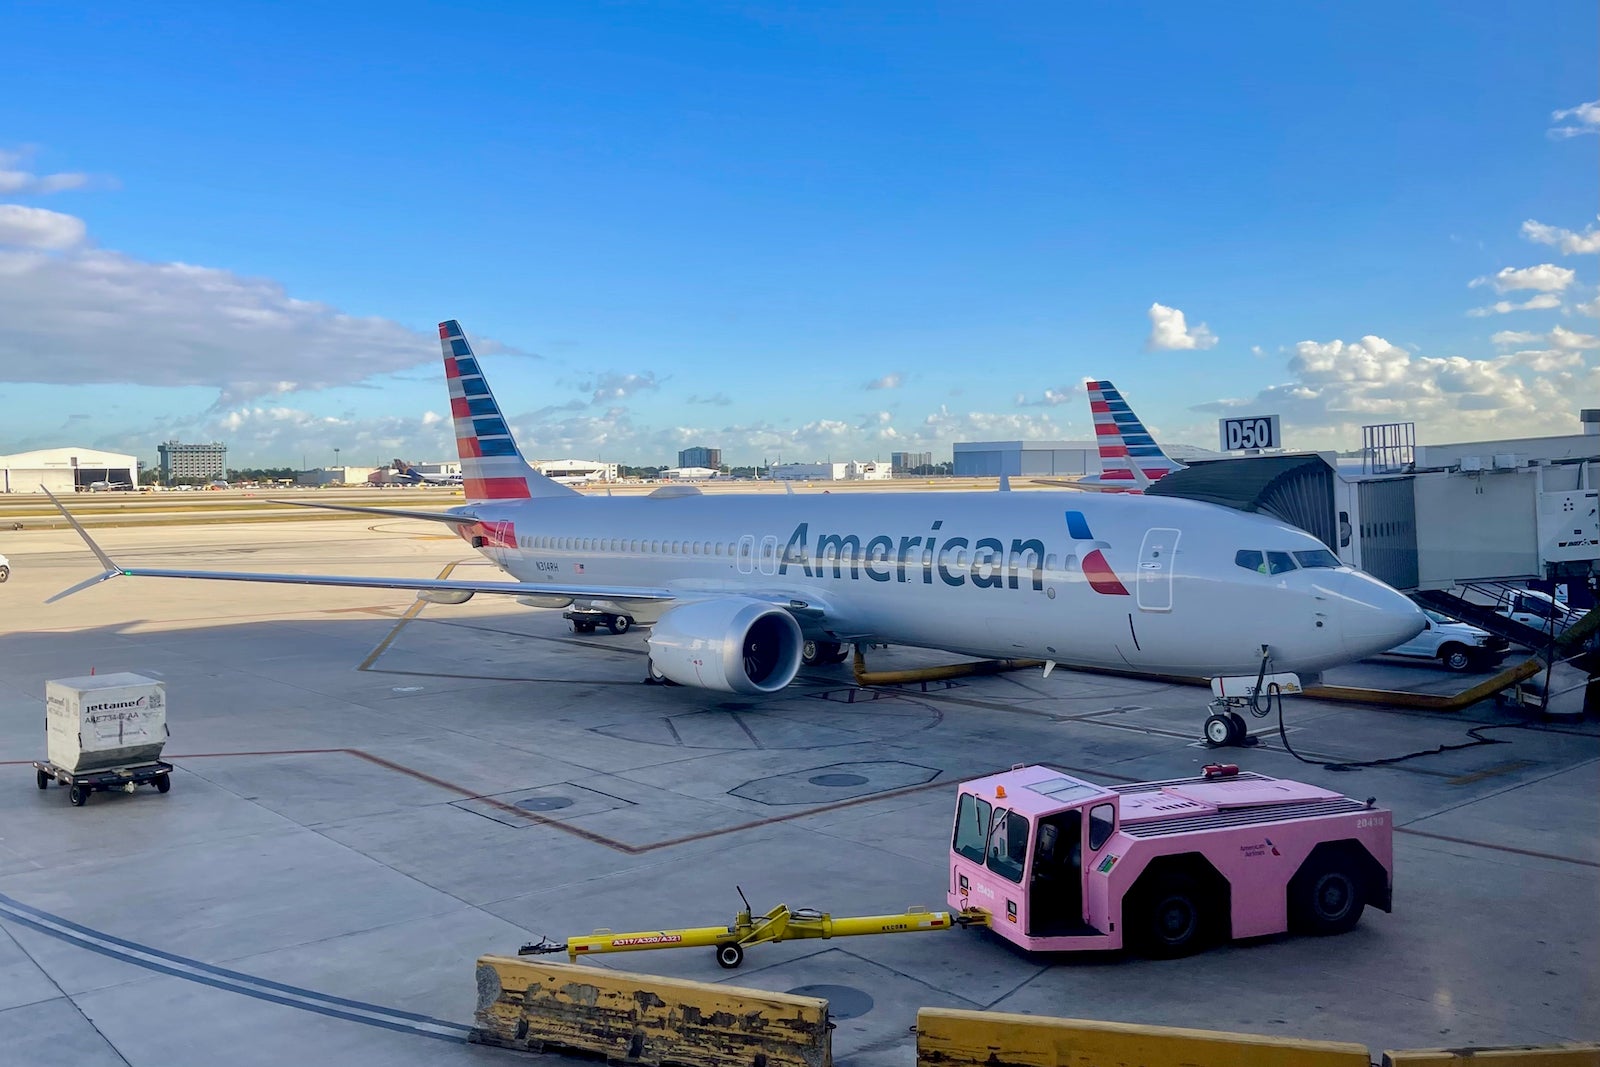 An American Airlines plane parked at an airport.